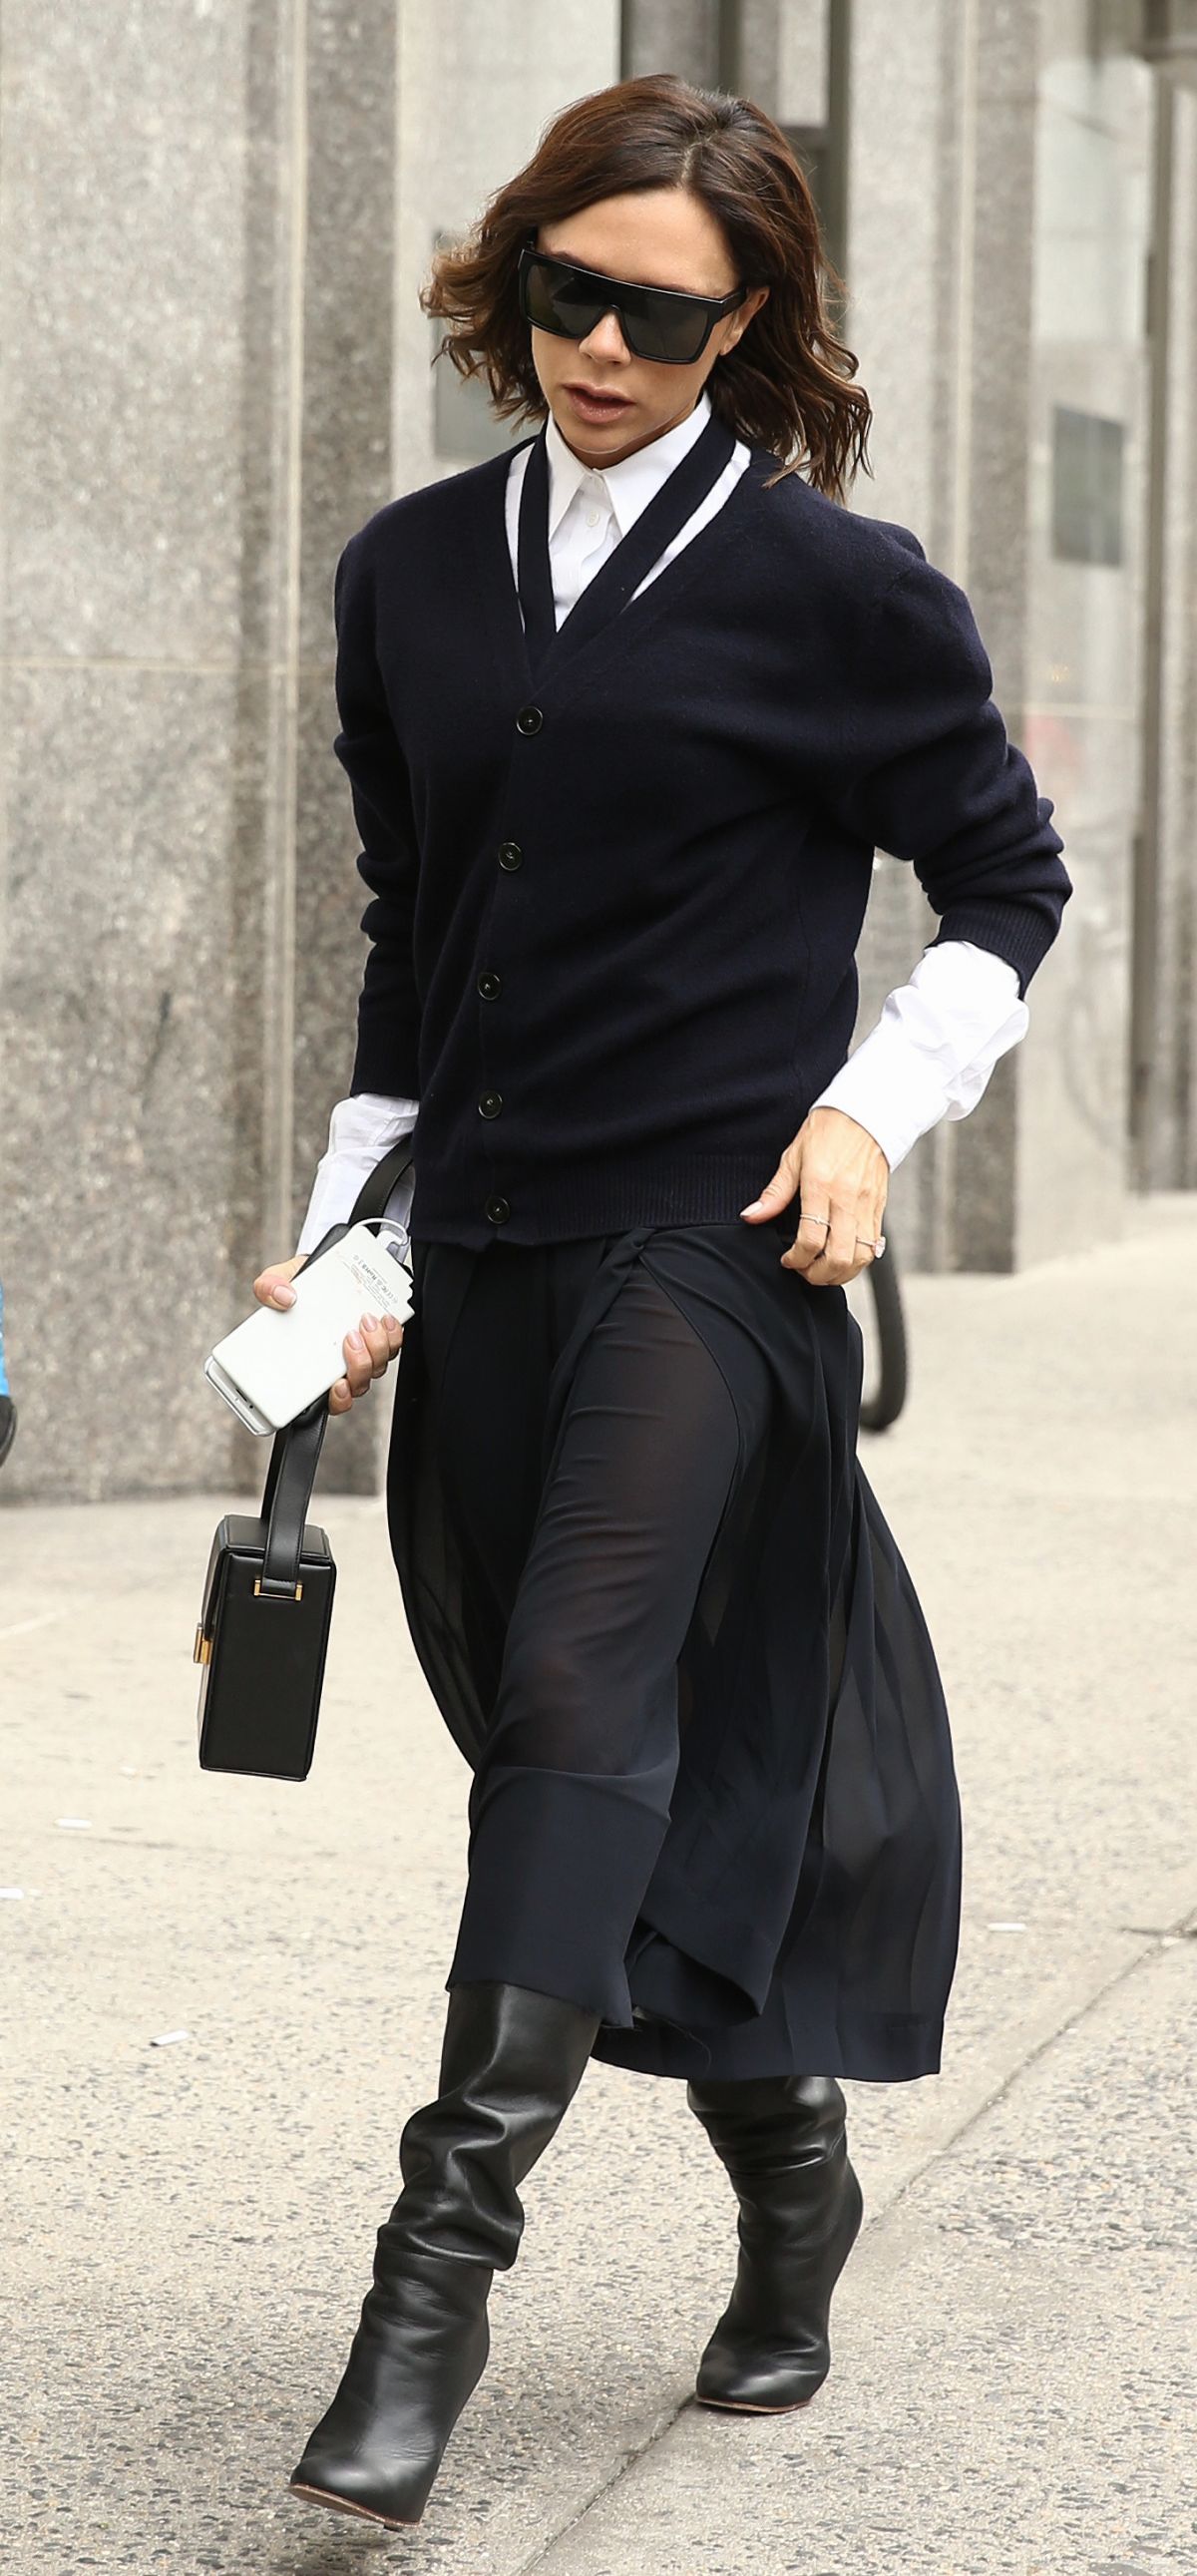 VICTORIA BECKHAM Leaves Her Hotel in New York 05/11/2017 – HawtCelebs